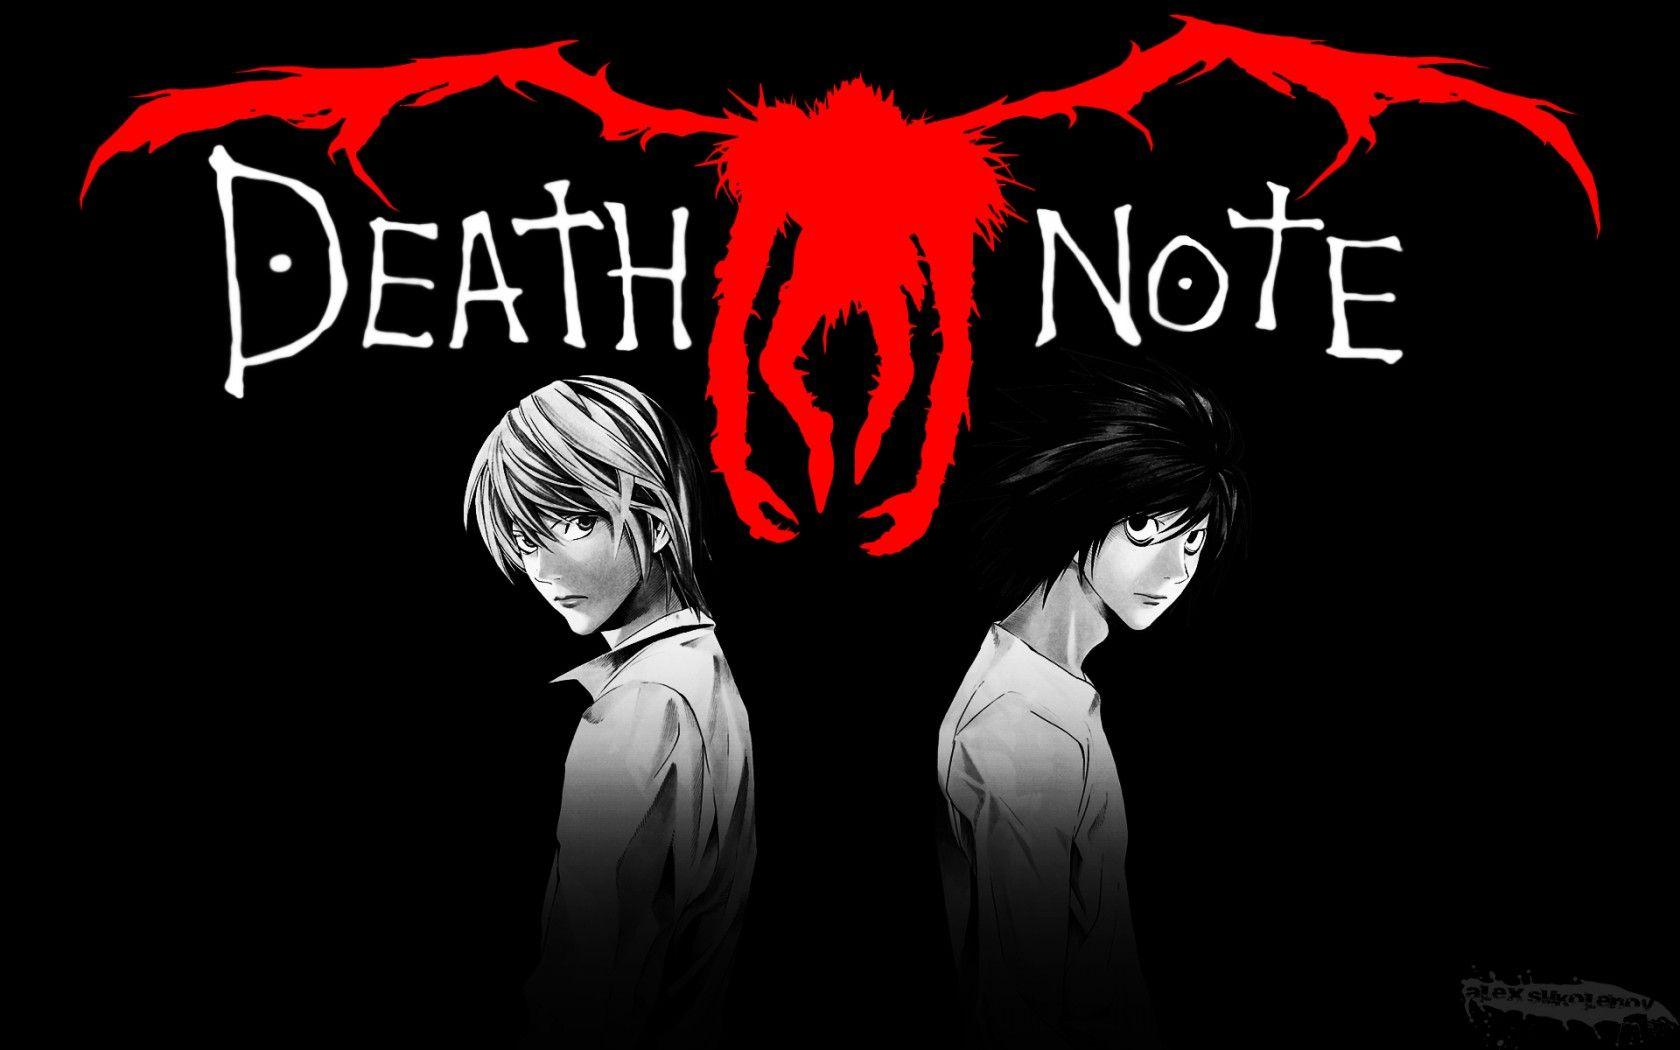 Death Note Light Yagami V L and Ryuk wallpaper 2018 in Anime